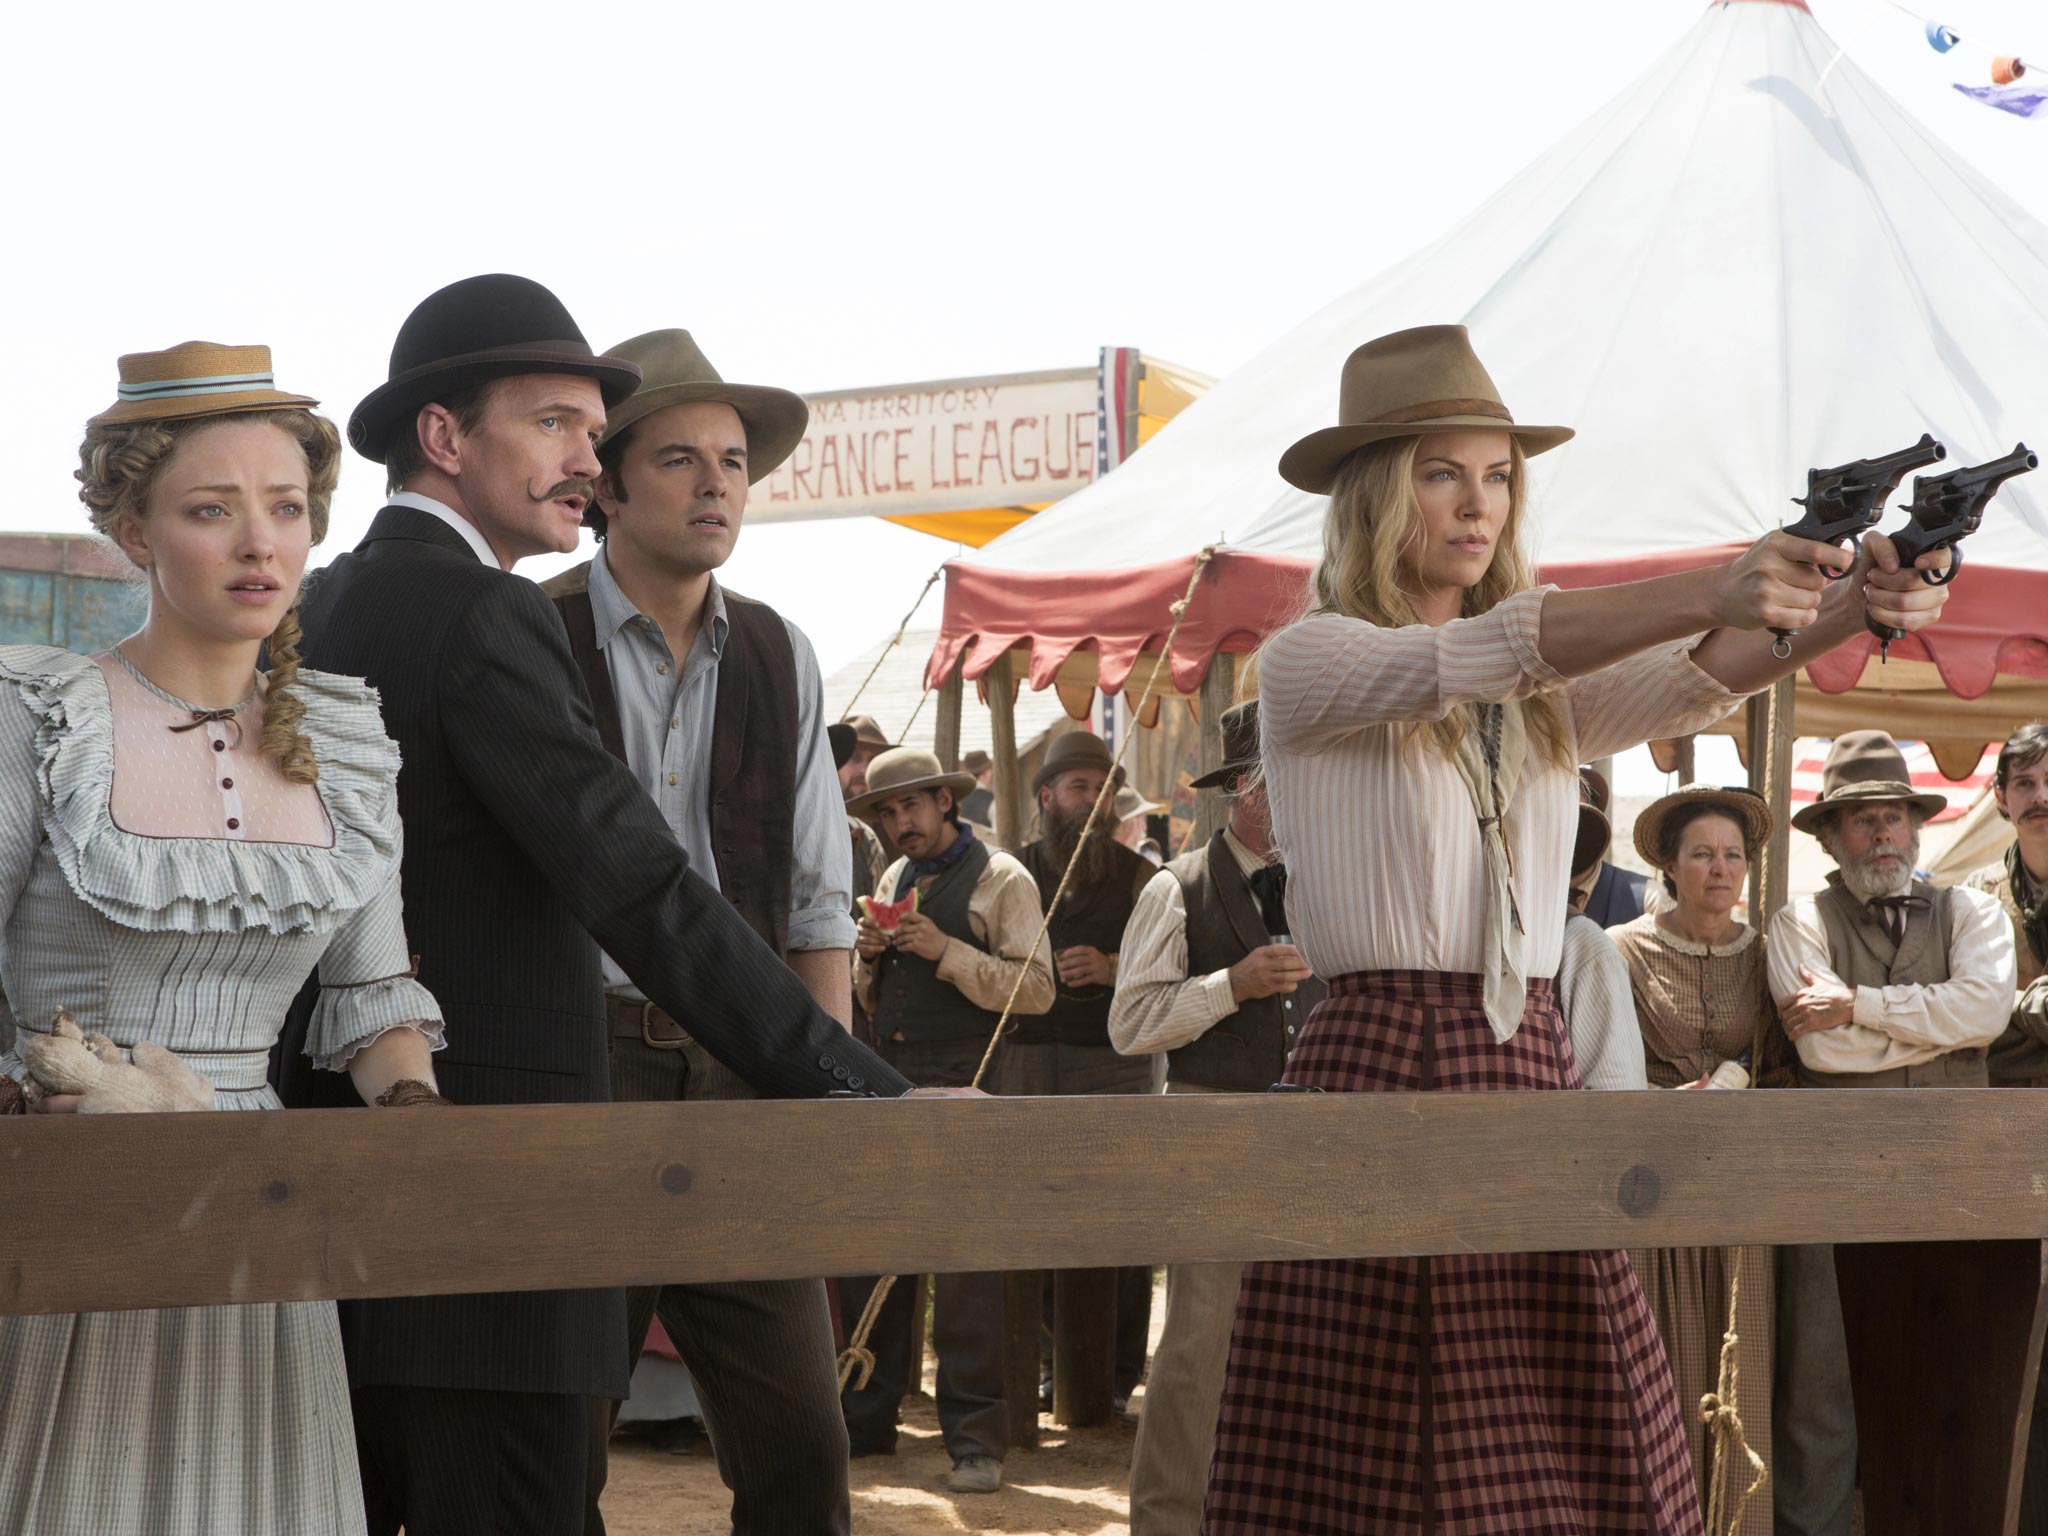 'A Million Ways to Die in the West', with Amanda Seyfried, Neil Patrick Harris, Seth MacFarlane, and Charlize Theron